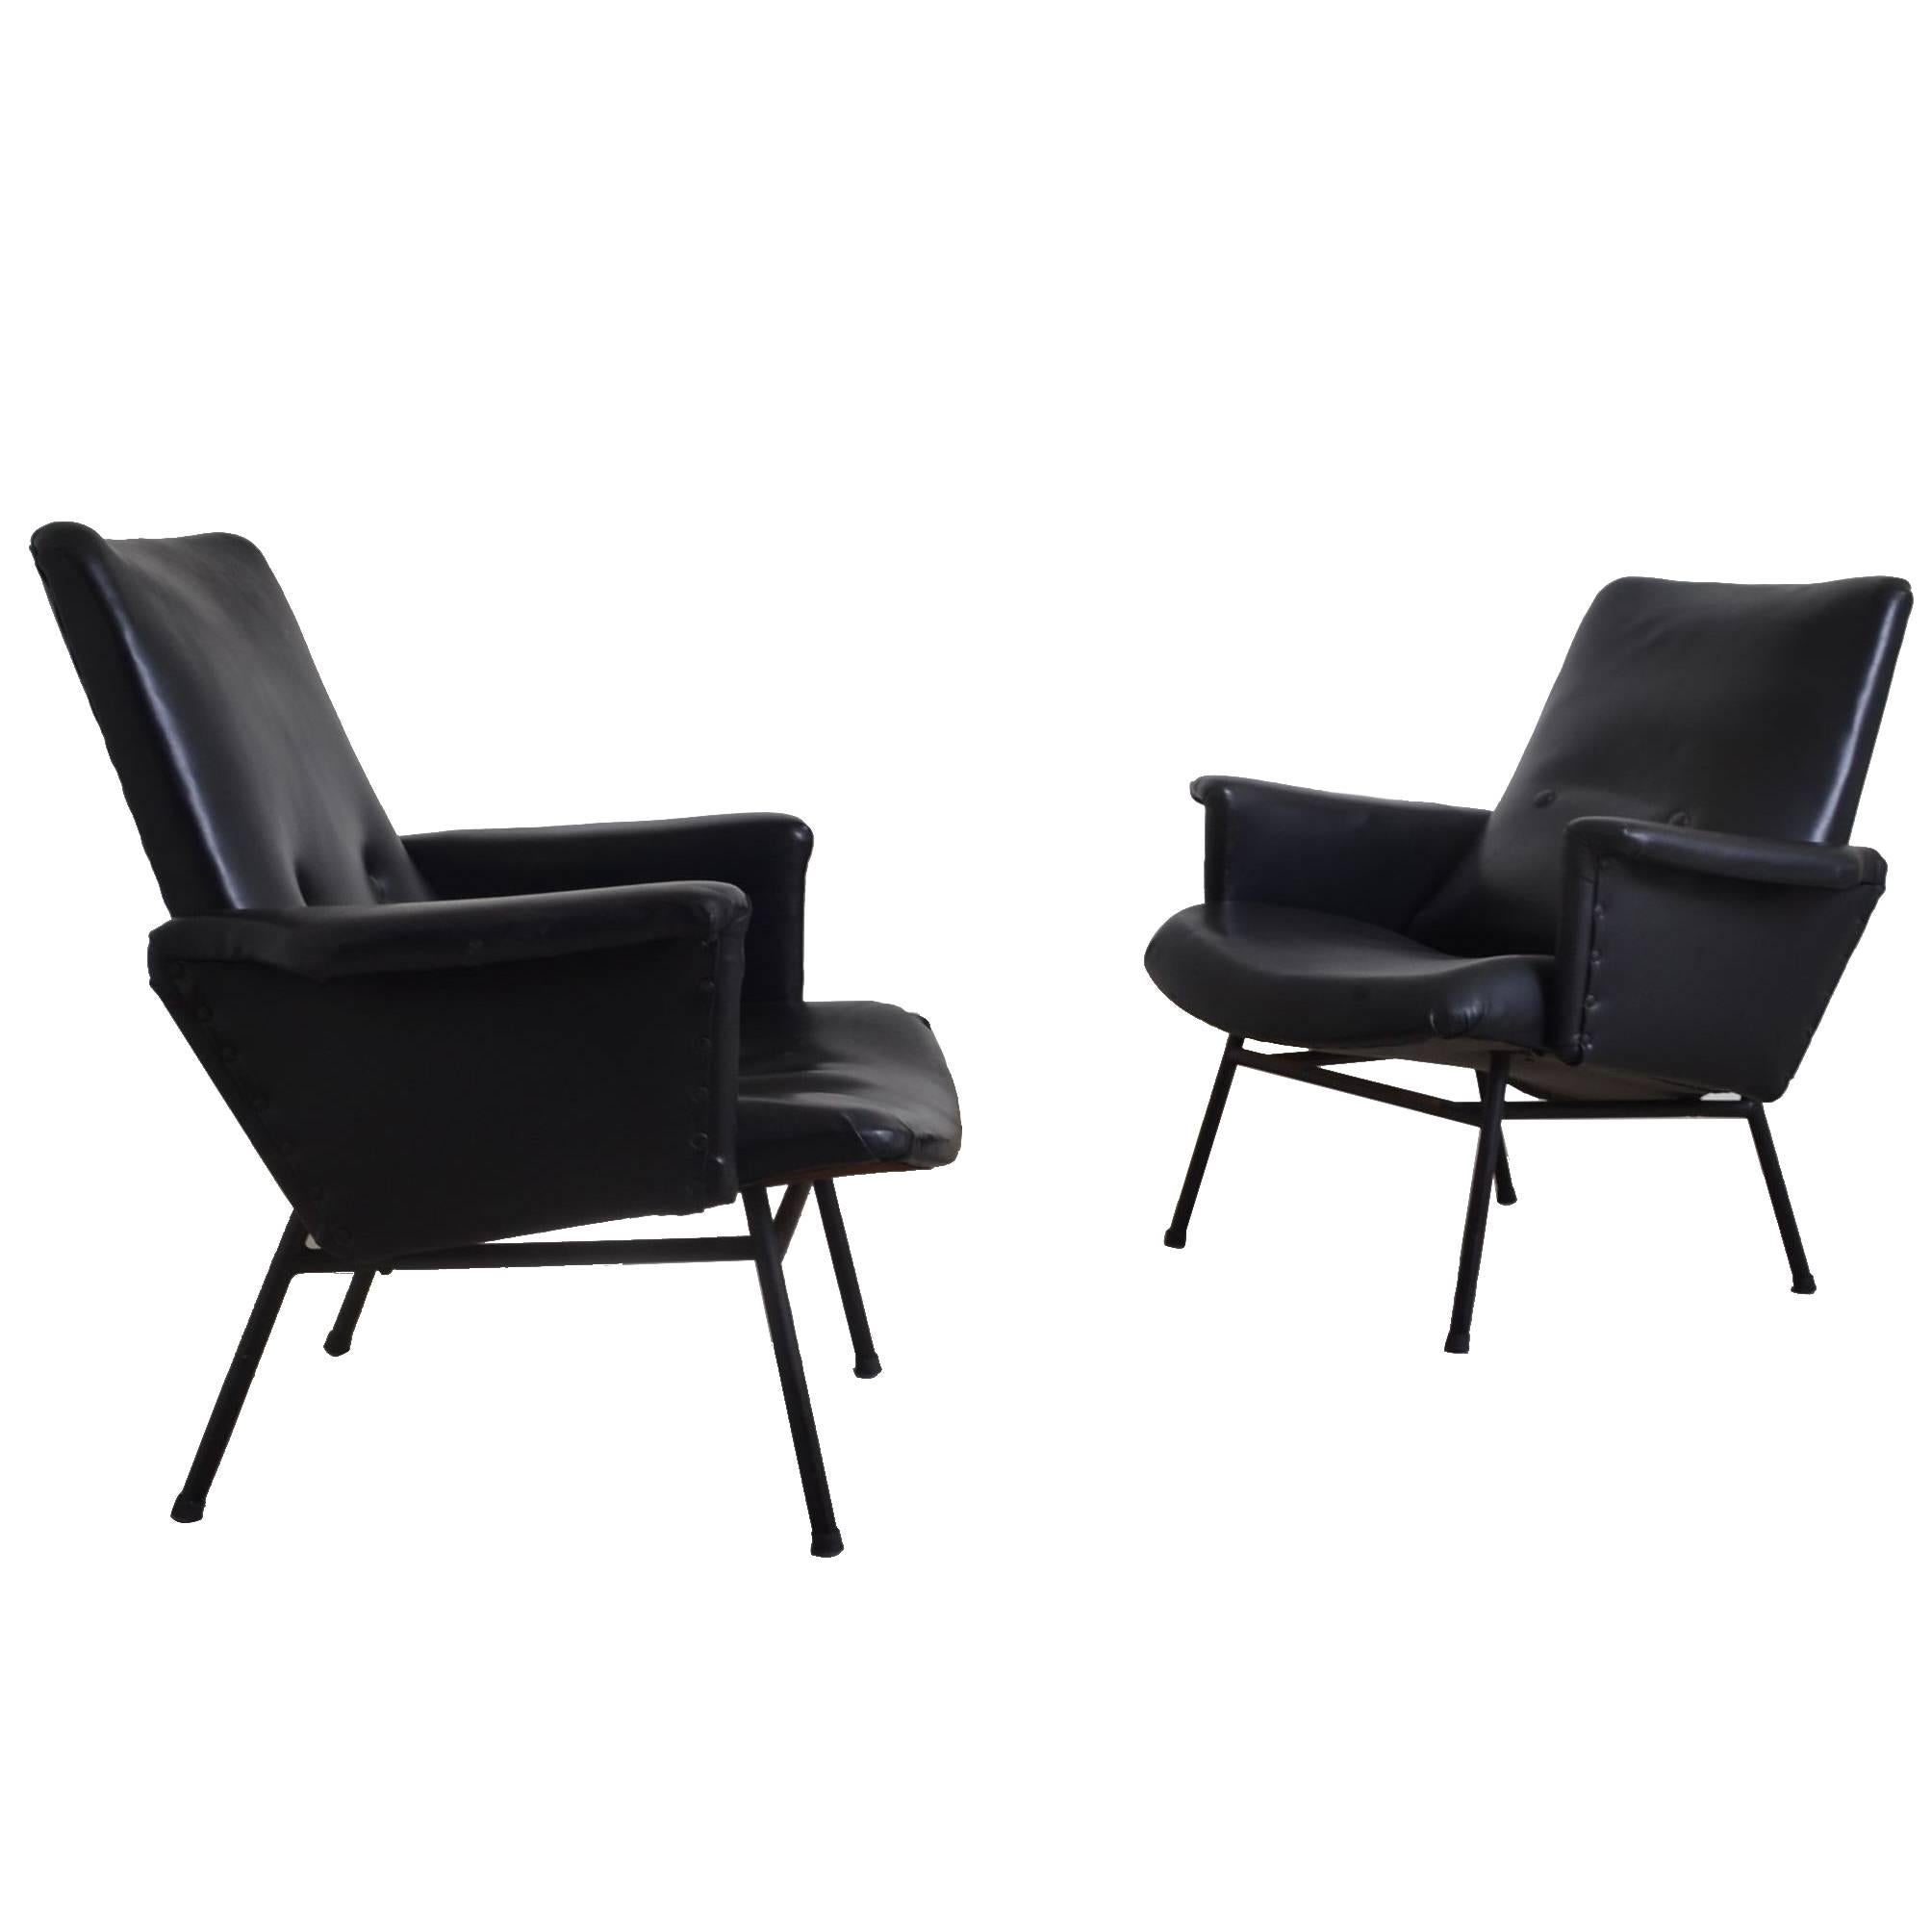 Pair of Pierre Guariche SK660 Armchairs, France, circa 1955